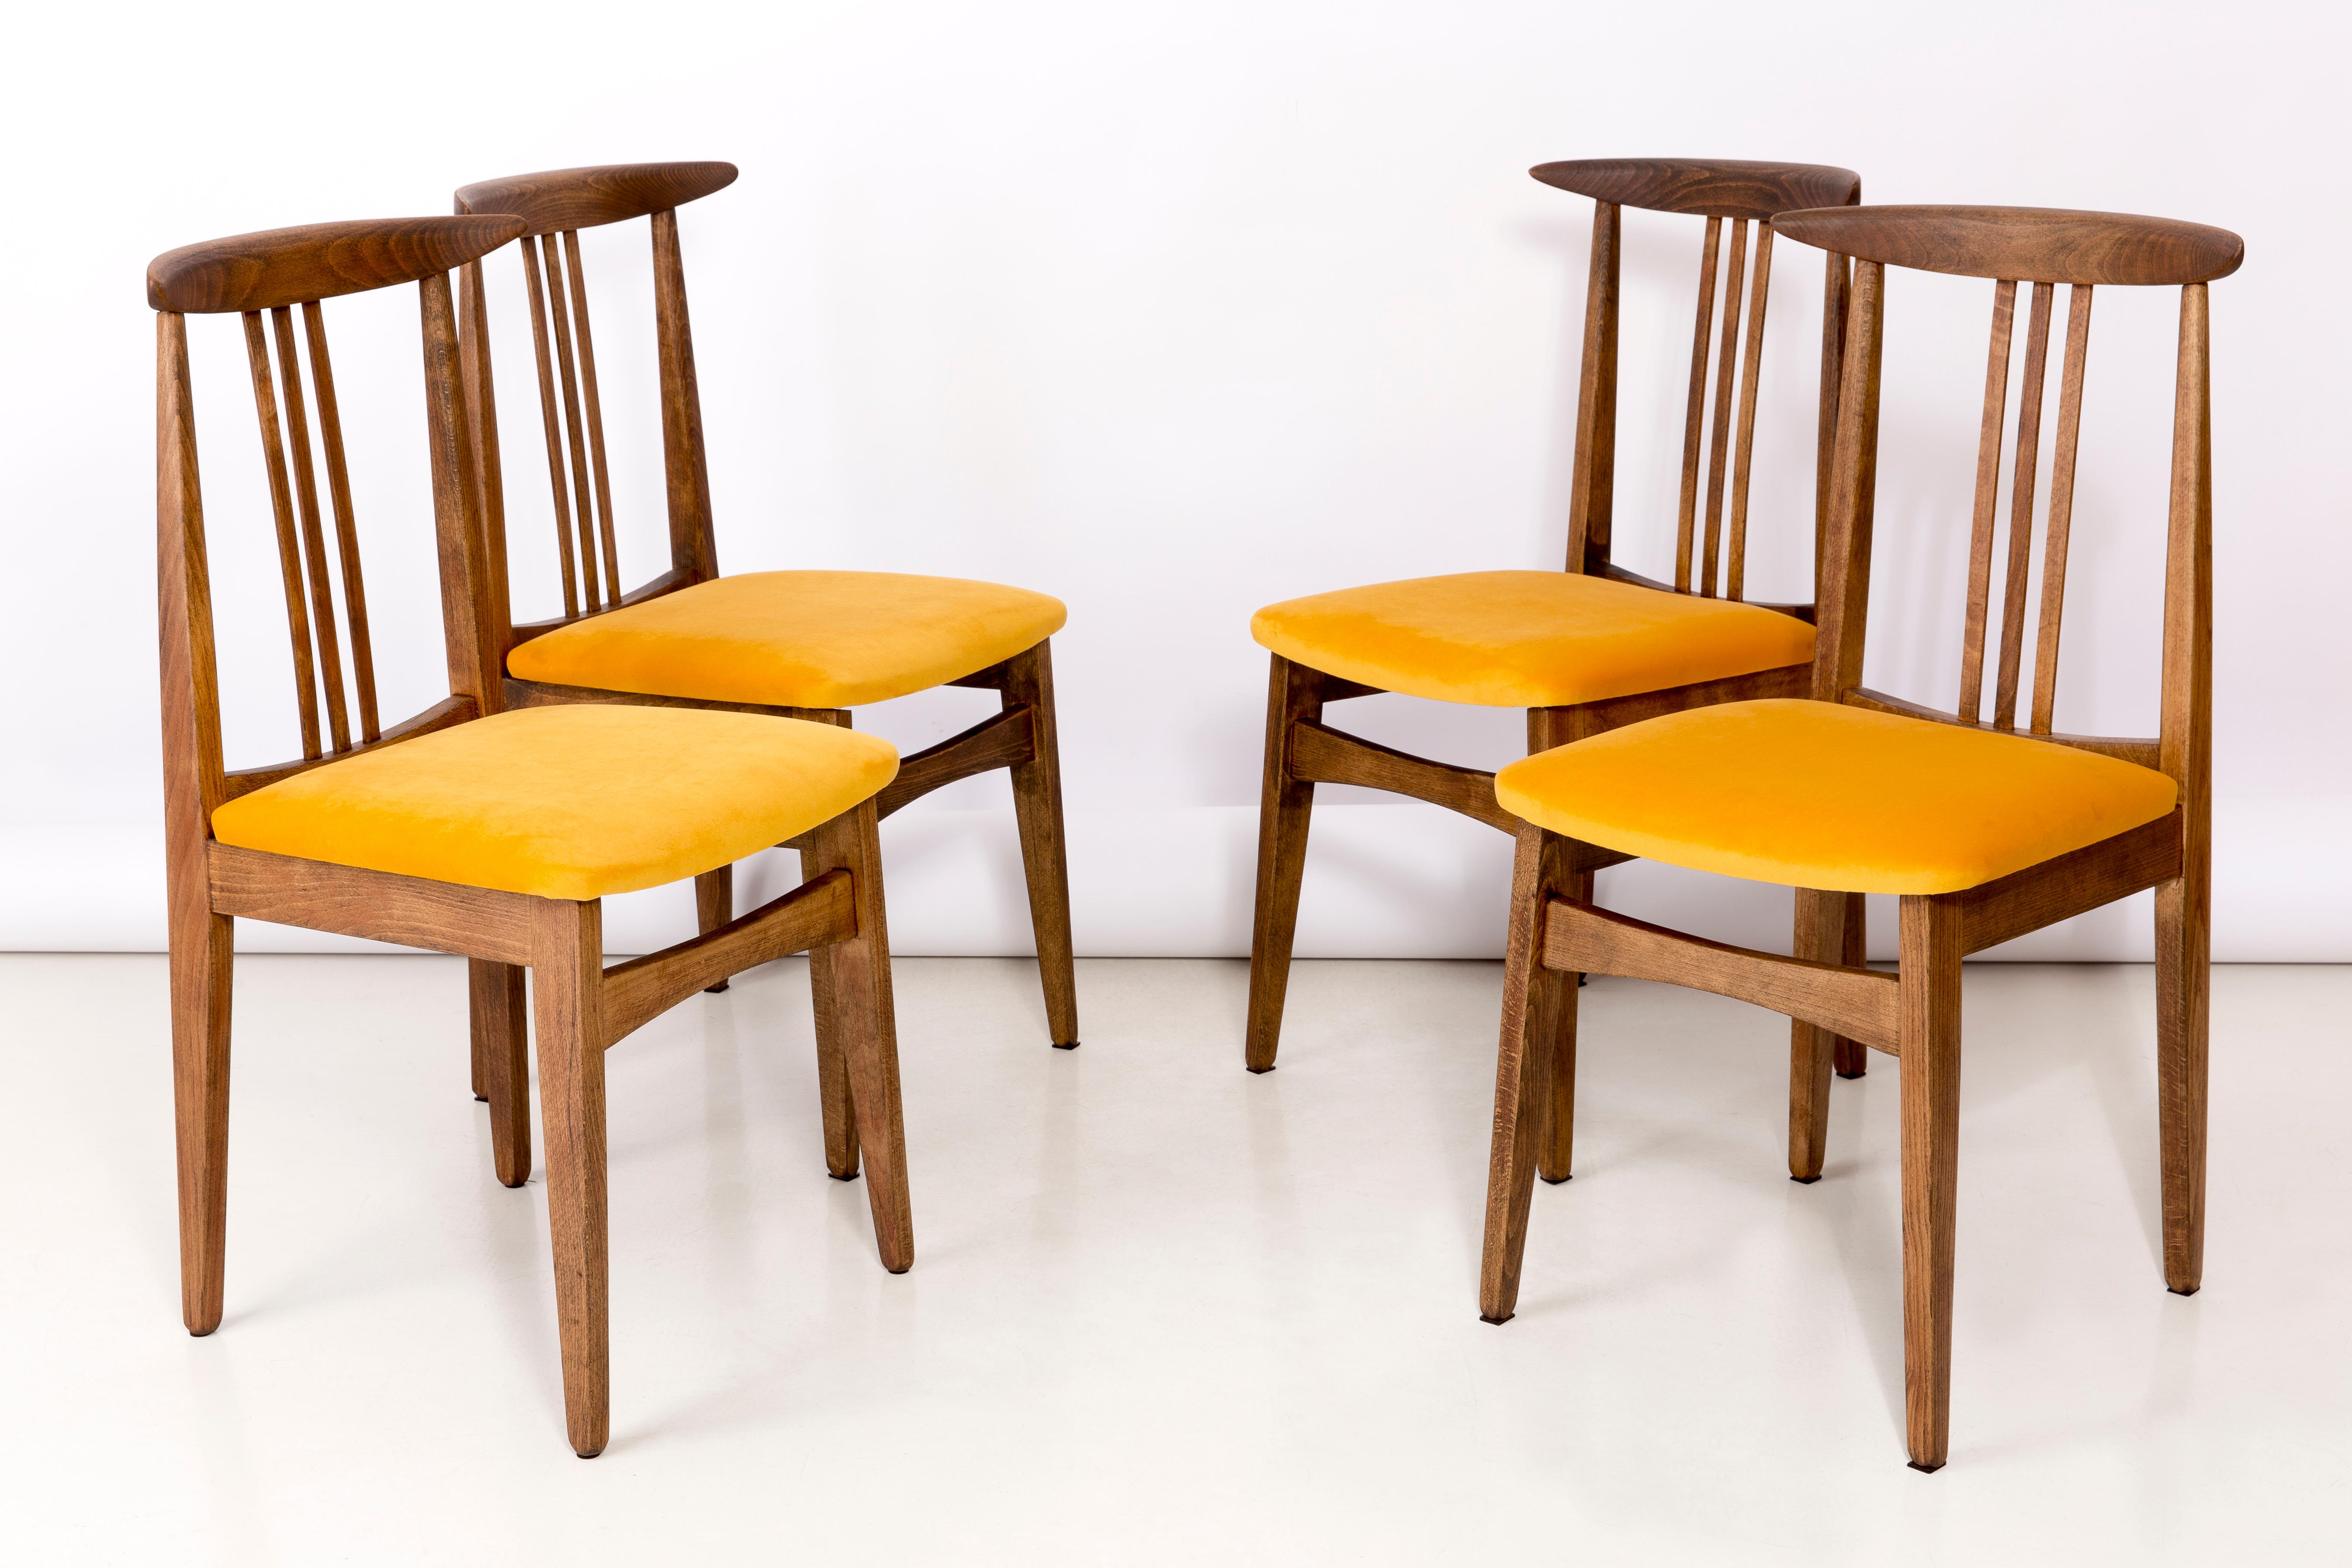 Set of twelve beech chairs designed by M. Zielinski, type 200 / 100B. Manufactured by the Opole Furniture Industry Center at the end of the 1960s in Poland. The chairs have undergone a complete carpentry and upholstery renovation. Seats covered with